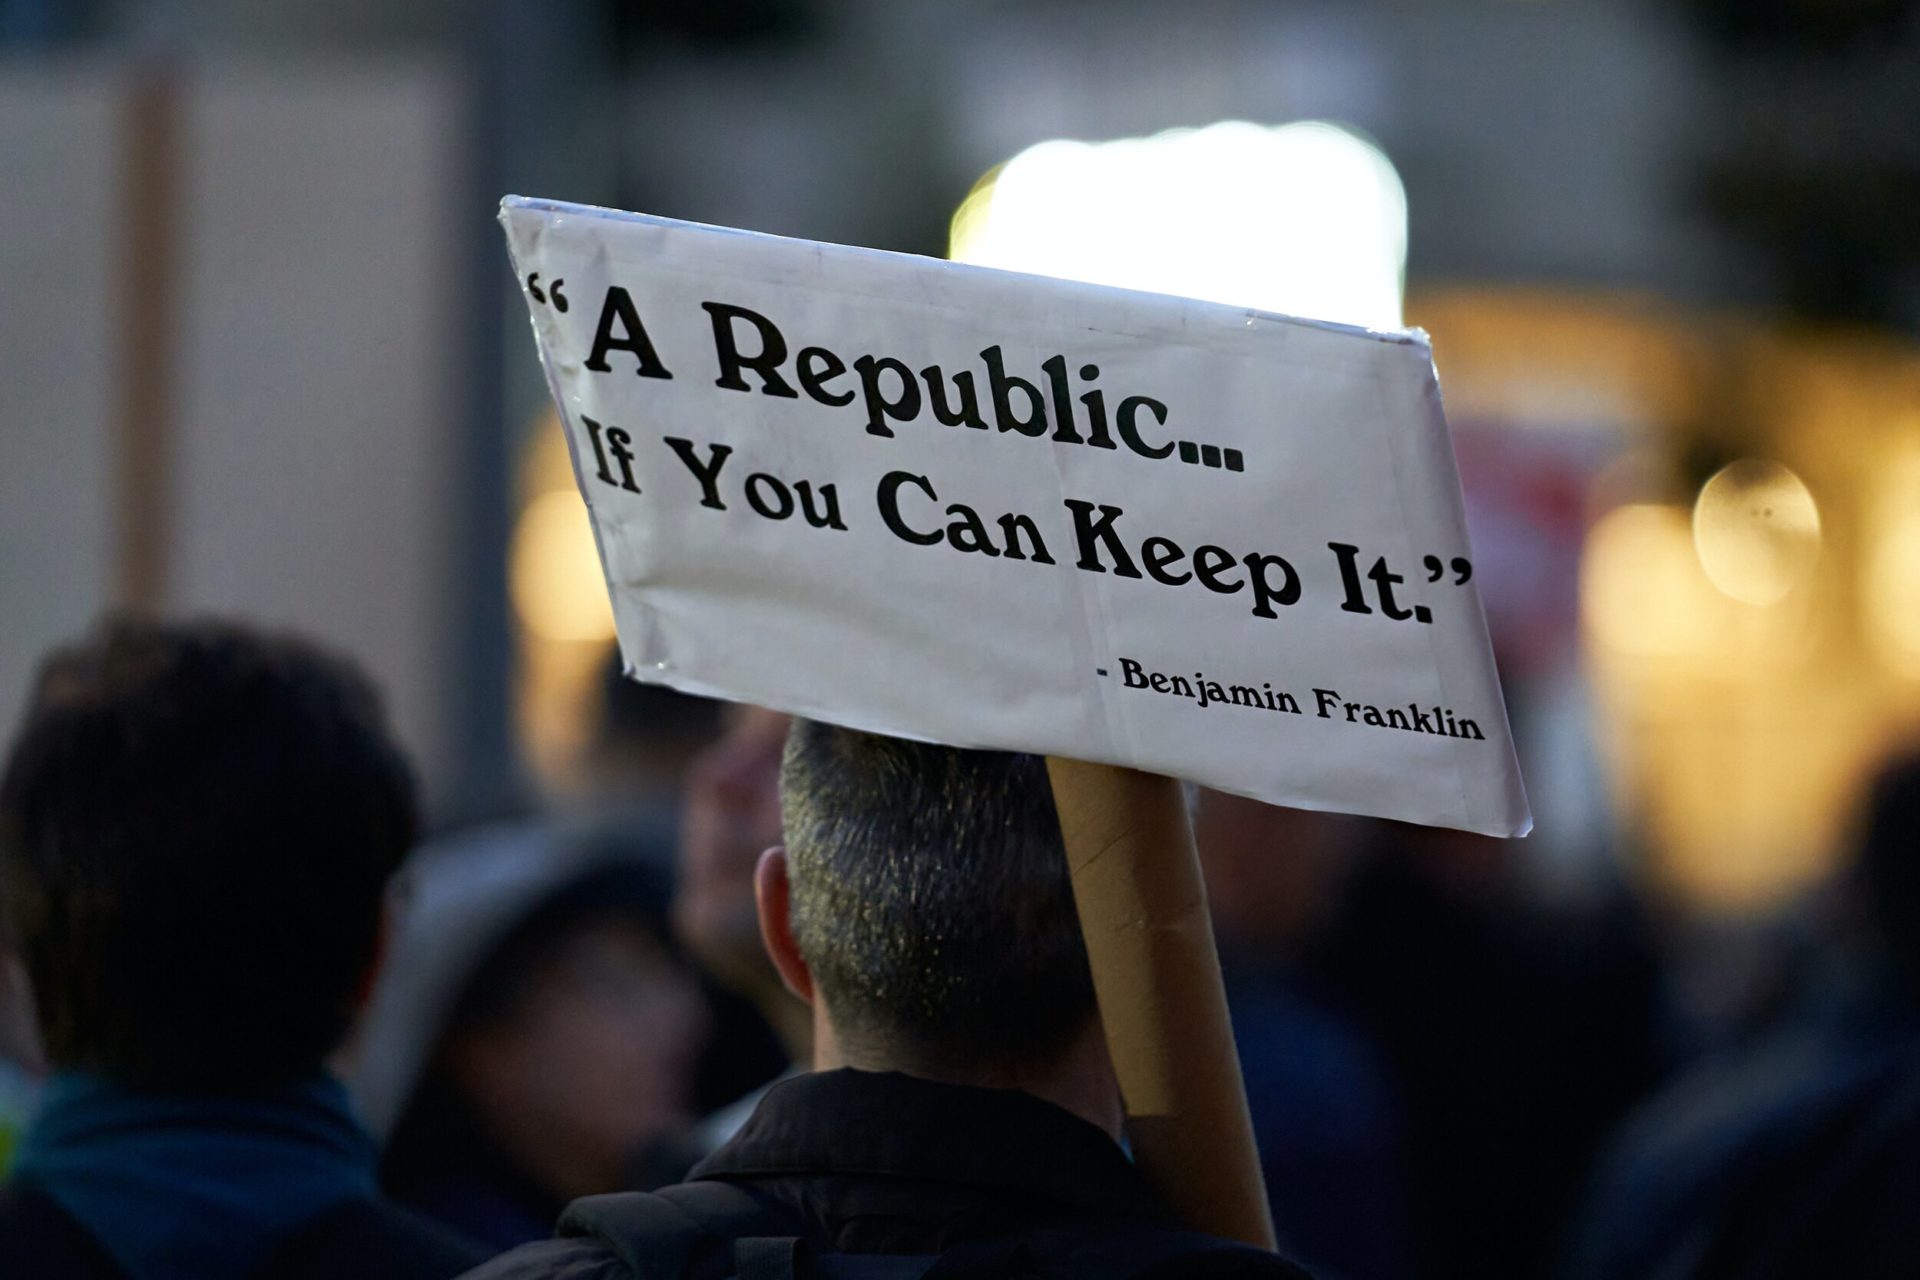 December 17, 2019 - A protester holds a sign reading "A Republic... If You Can Keep It. - Benjamin Franklin" in front of House Speaker Nancy Pelosi's offices (she was in Washington at the time) in support of the impeachment of President Donald Trump…